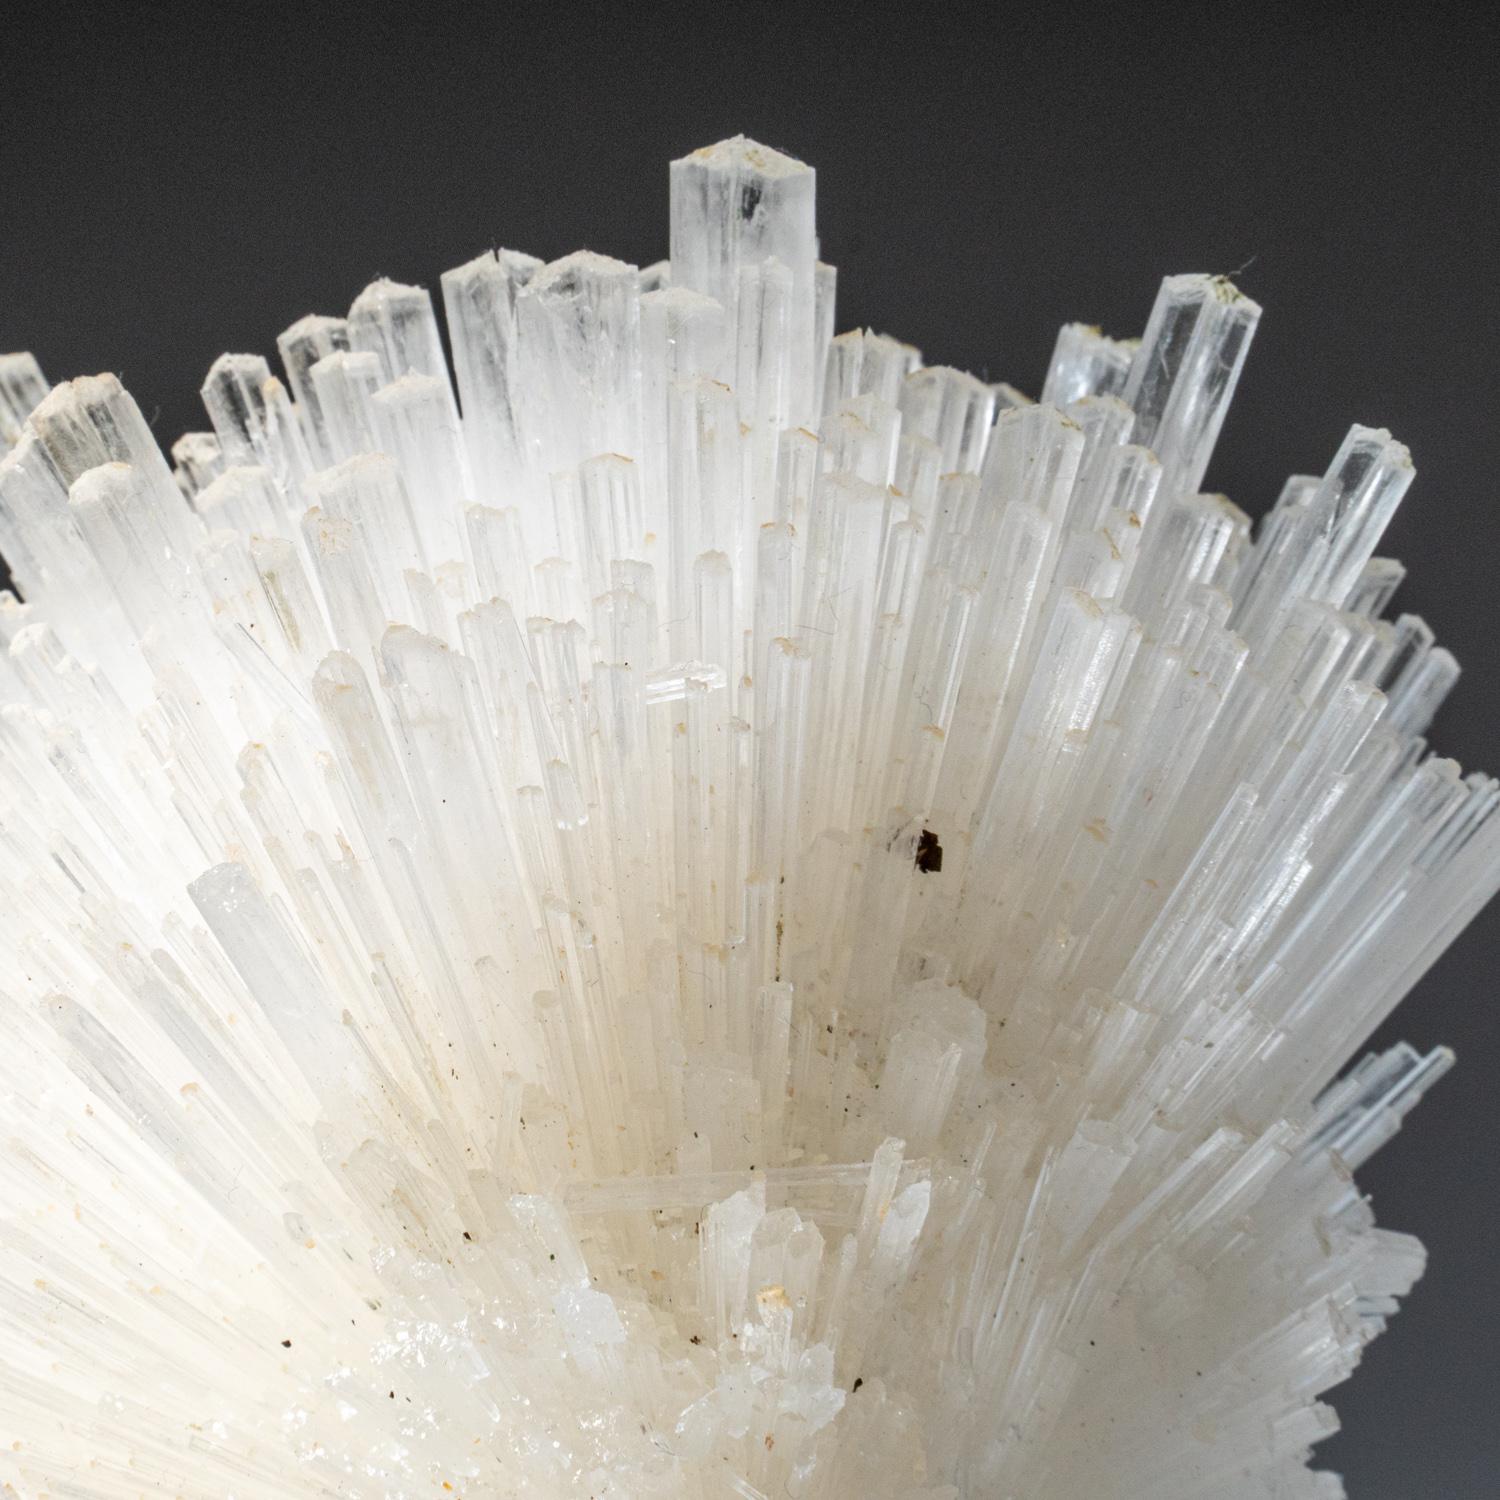 From Nasik District, Maharashtra, India Lustrous transparent-to-translucent colorless elongated scolecite crystals in a spray-shaped formation. The scolecite crystals have glassy crystal faces and are mostly translucent to transparent at the